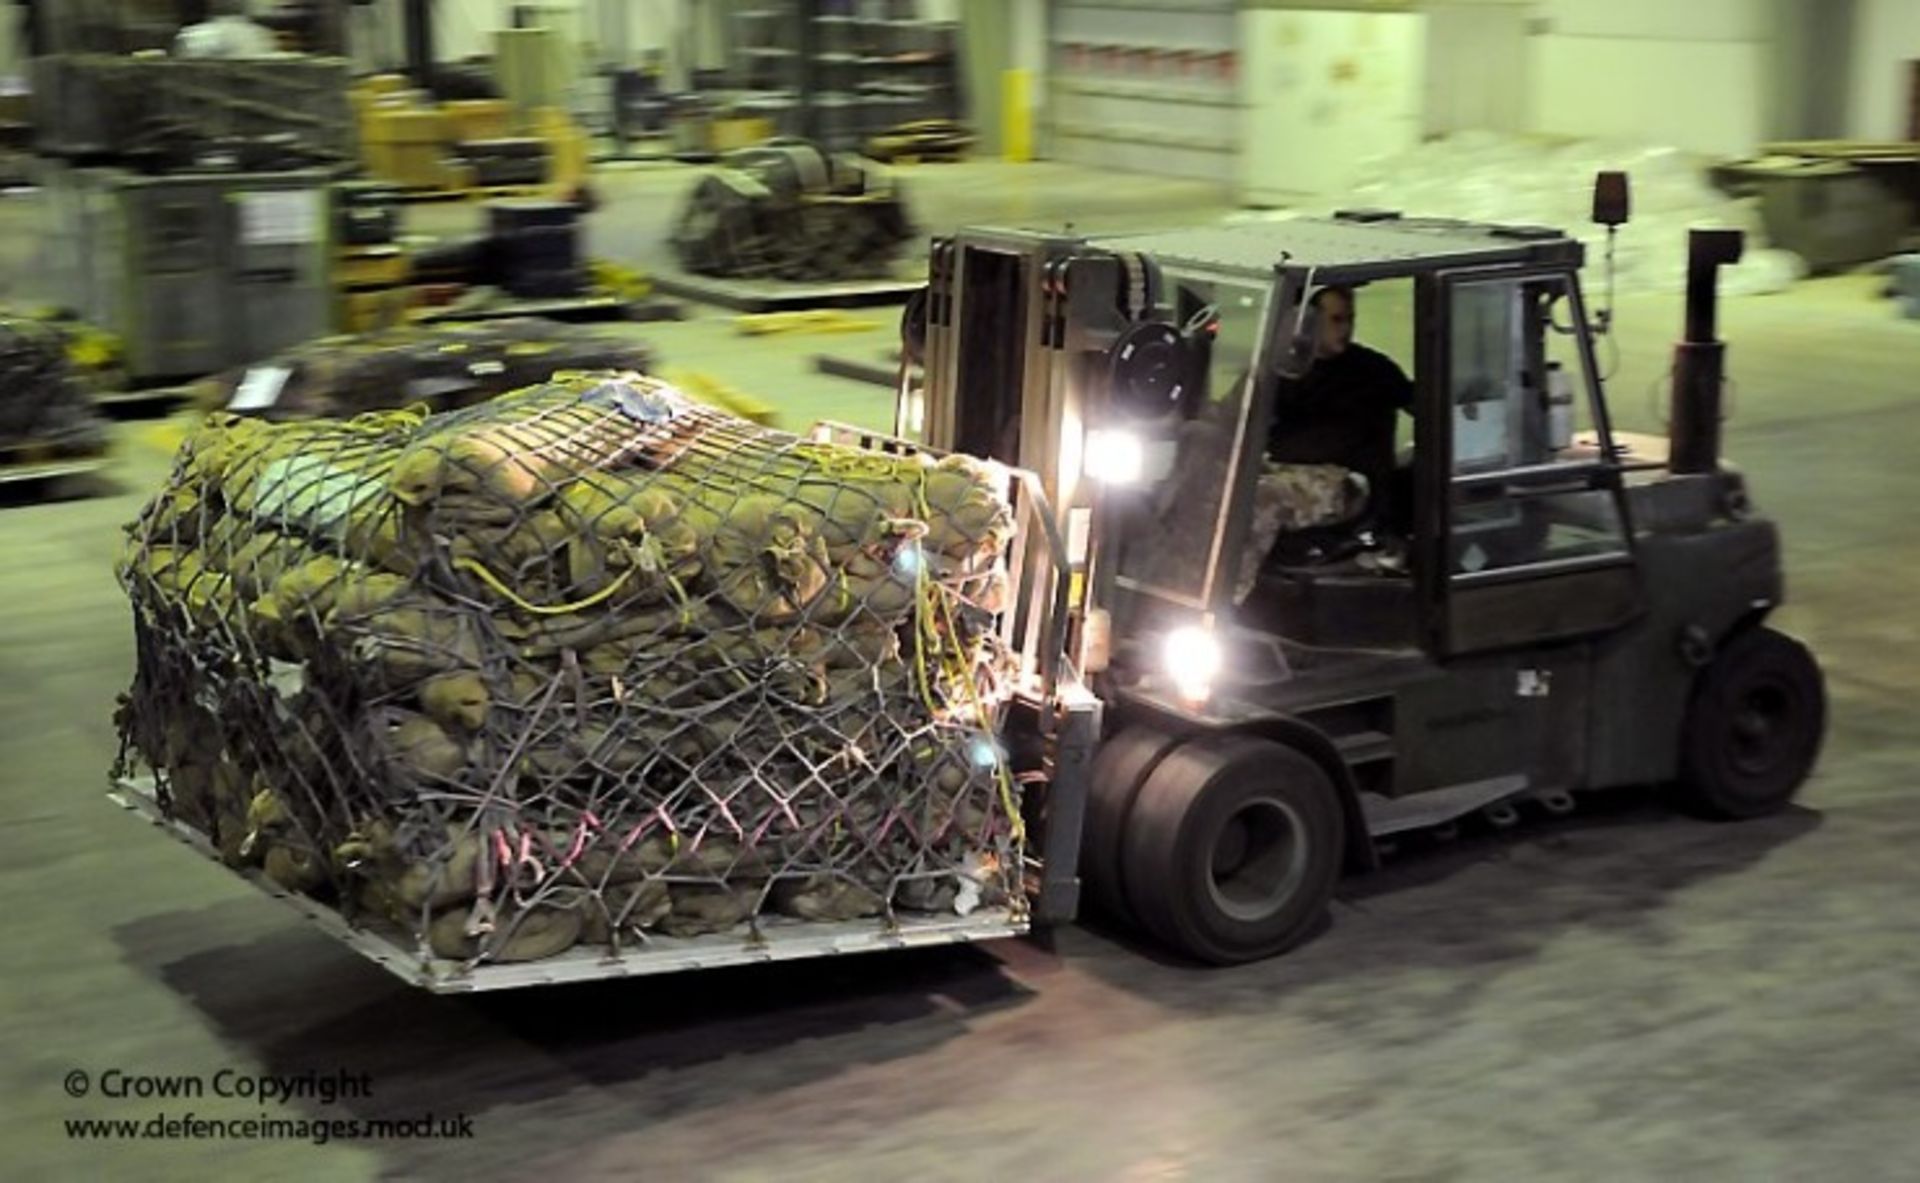 AAR Mobility Systems HCU6/E Aircraft Cargo Loading Pallet - Image 7 of 7